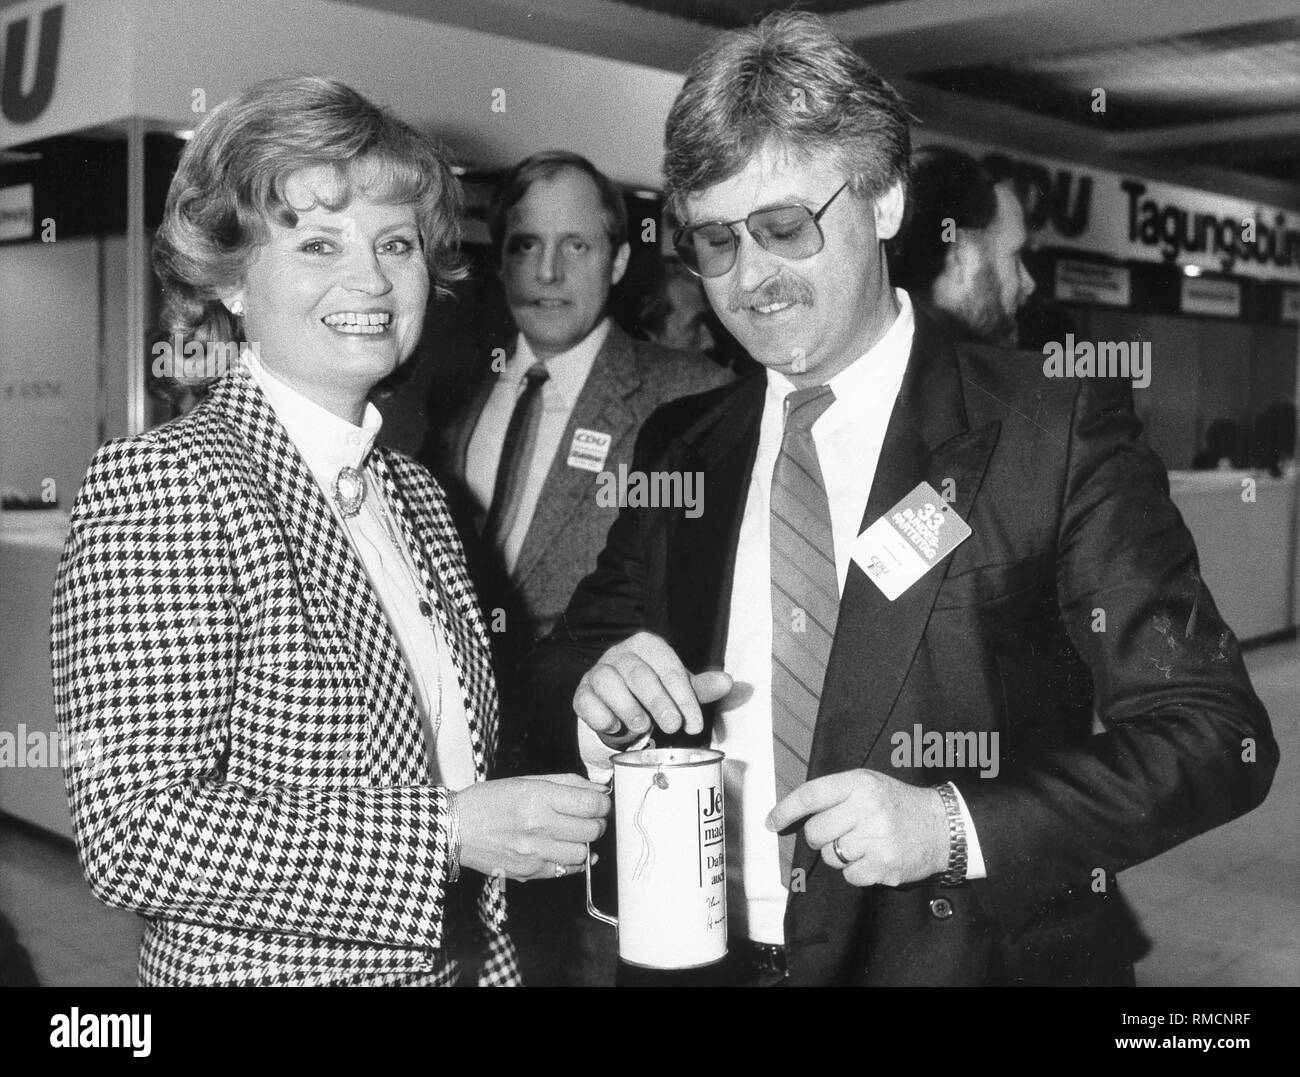 Hannelore Kohl, President of the foundation Kuratorium ZNS, is gathering as part of the 33rd Federal Party Congress of the CDU in Essen for the work of her 'Initiative Lebensmut', here with the European politician Elmar Brok. Stock Photo